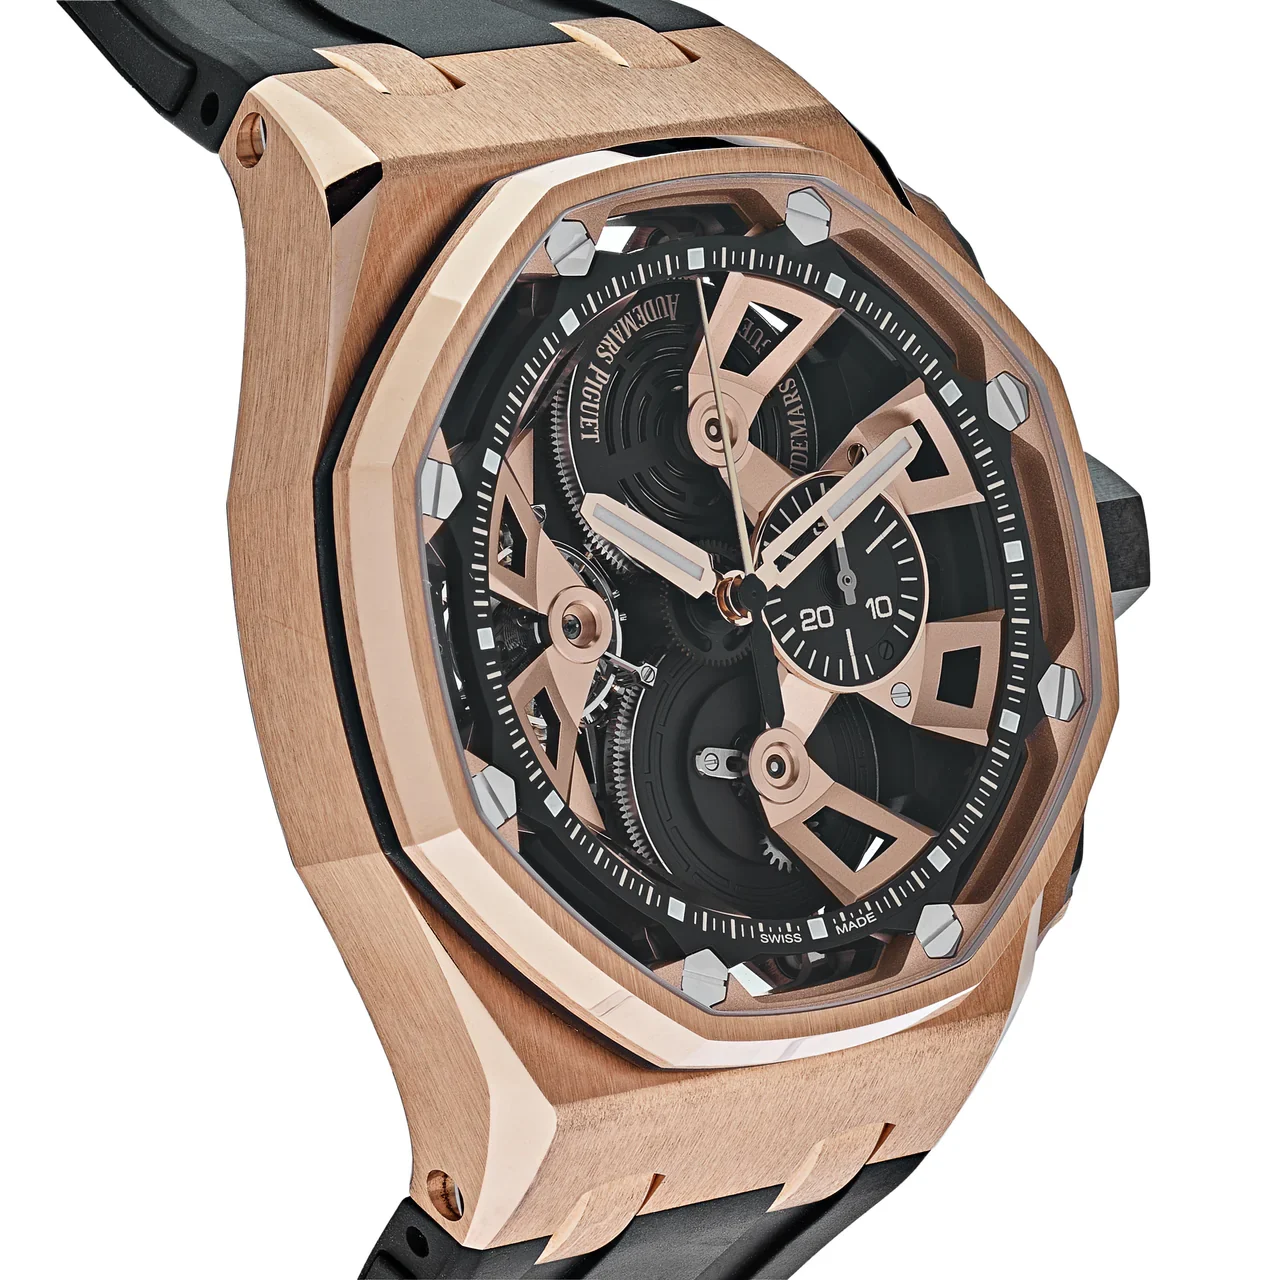 Audemars Piguet Royal Oak Offshore Tourbillon Chronograph 45 Rose Gold - Offshore 25th Anniversary - Limited to 50 Pieces 26421OR.OO.A002CA.01 Listing Image 3